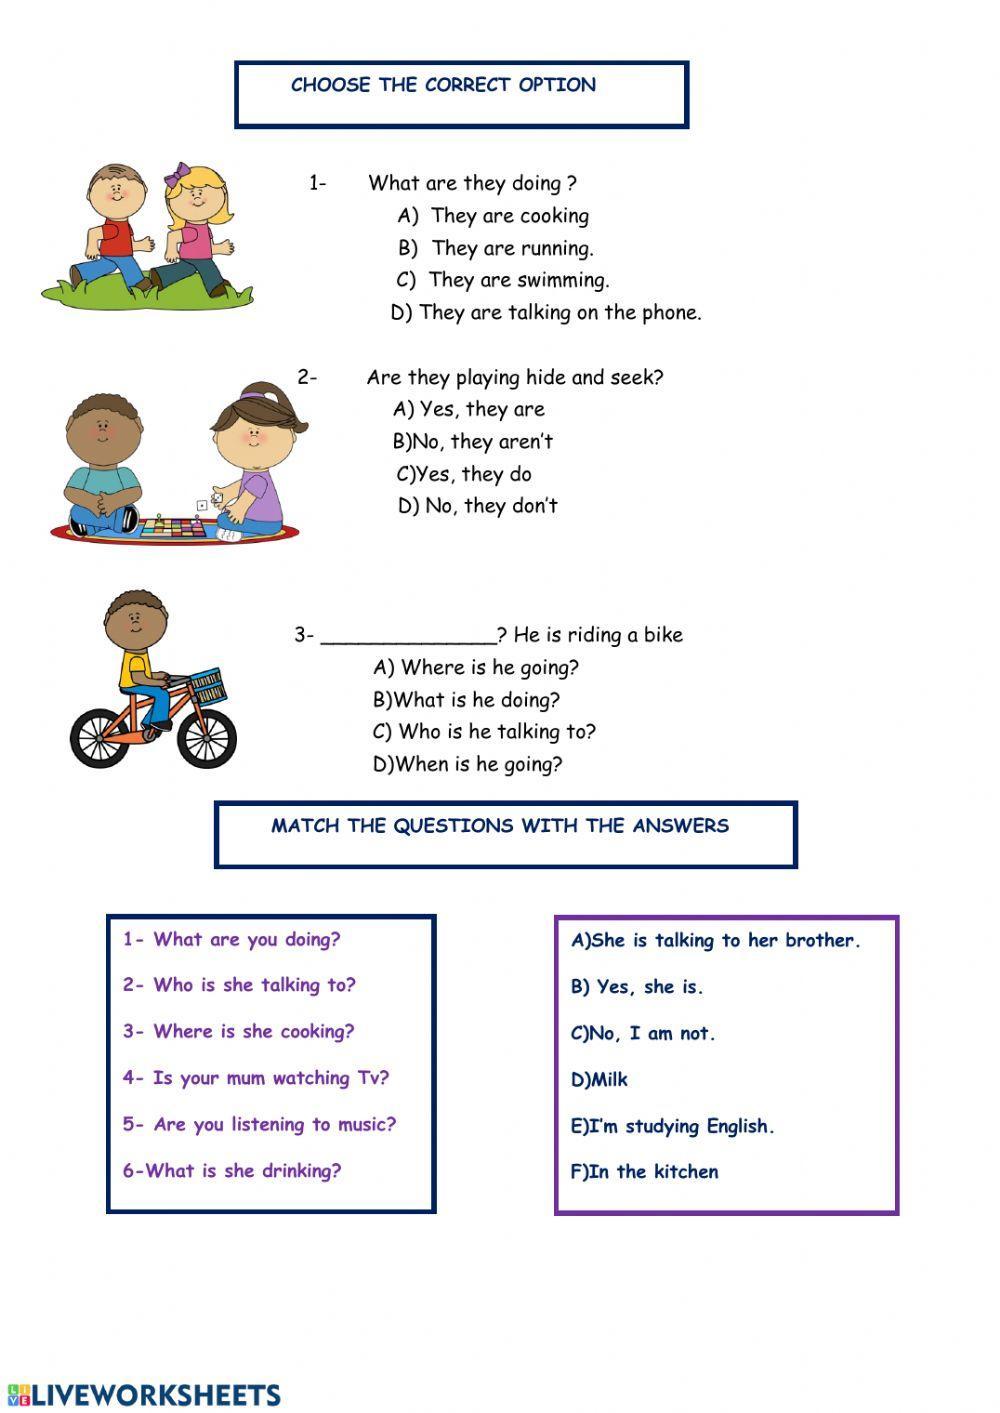 Present Continuous Tense online activity for A1 | Live Worksheets